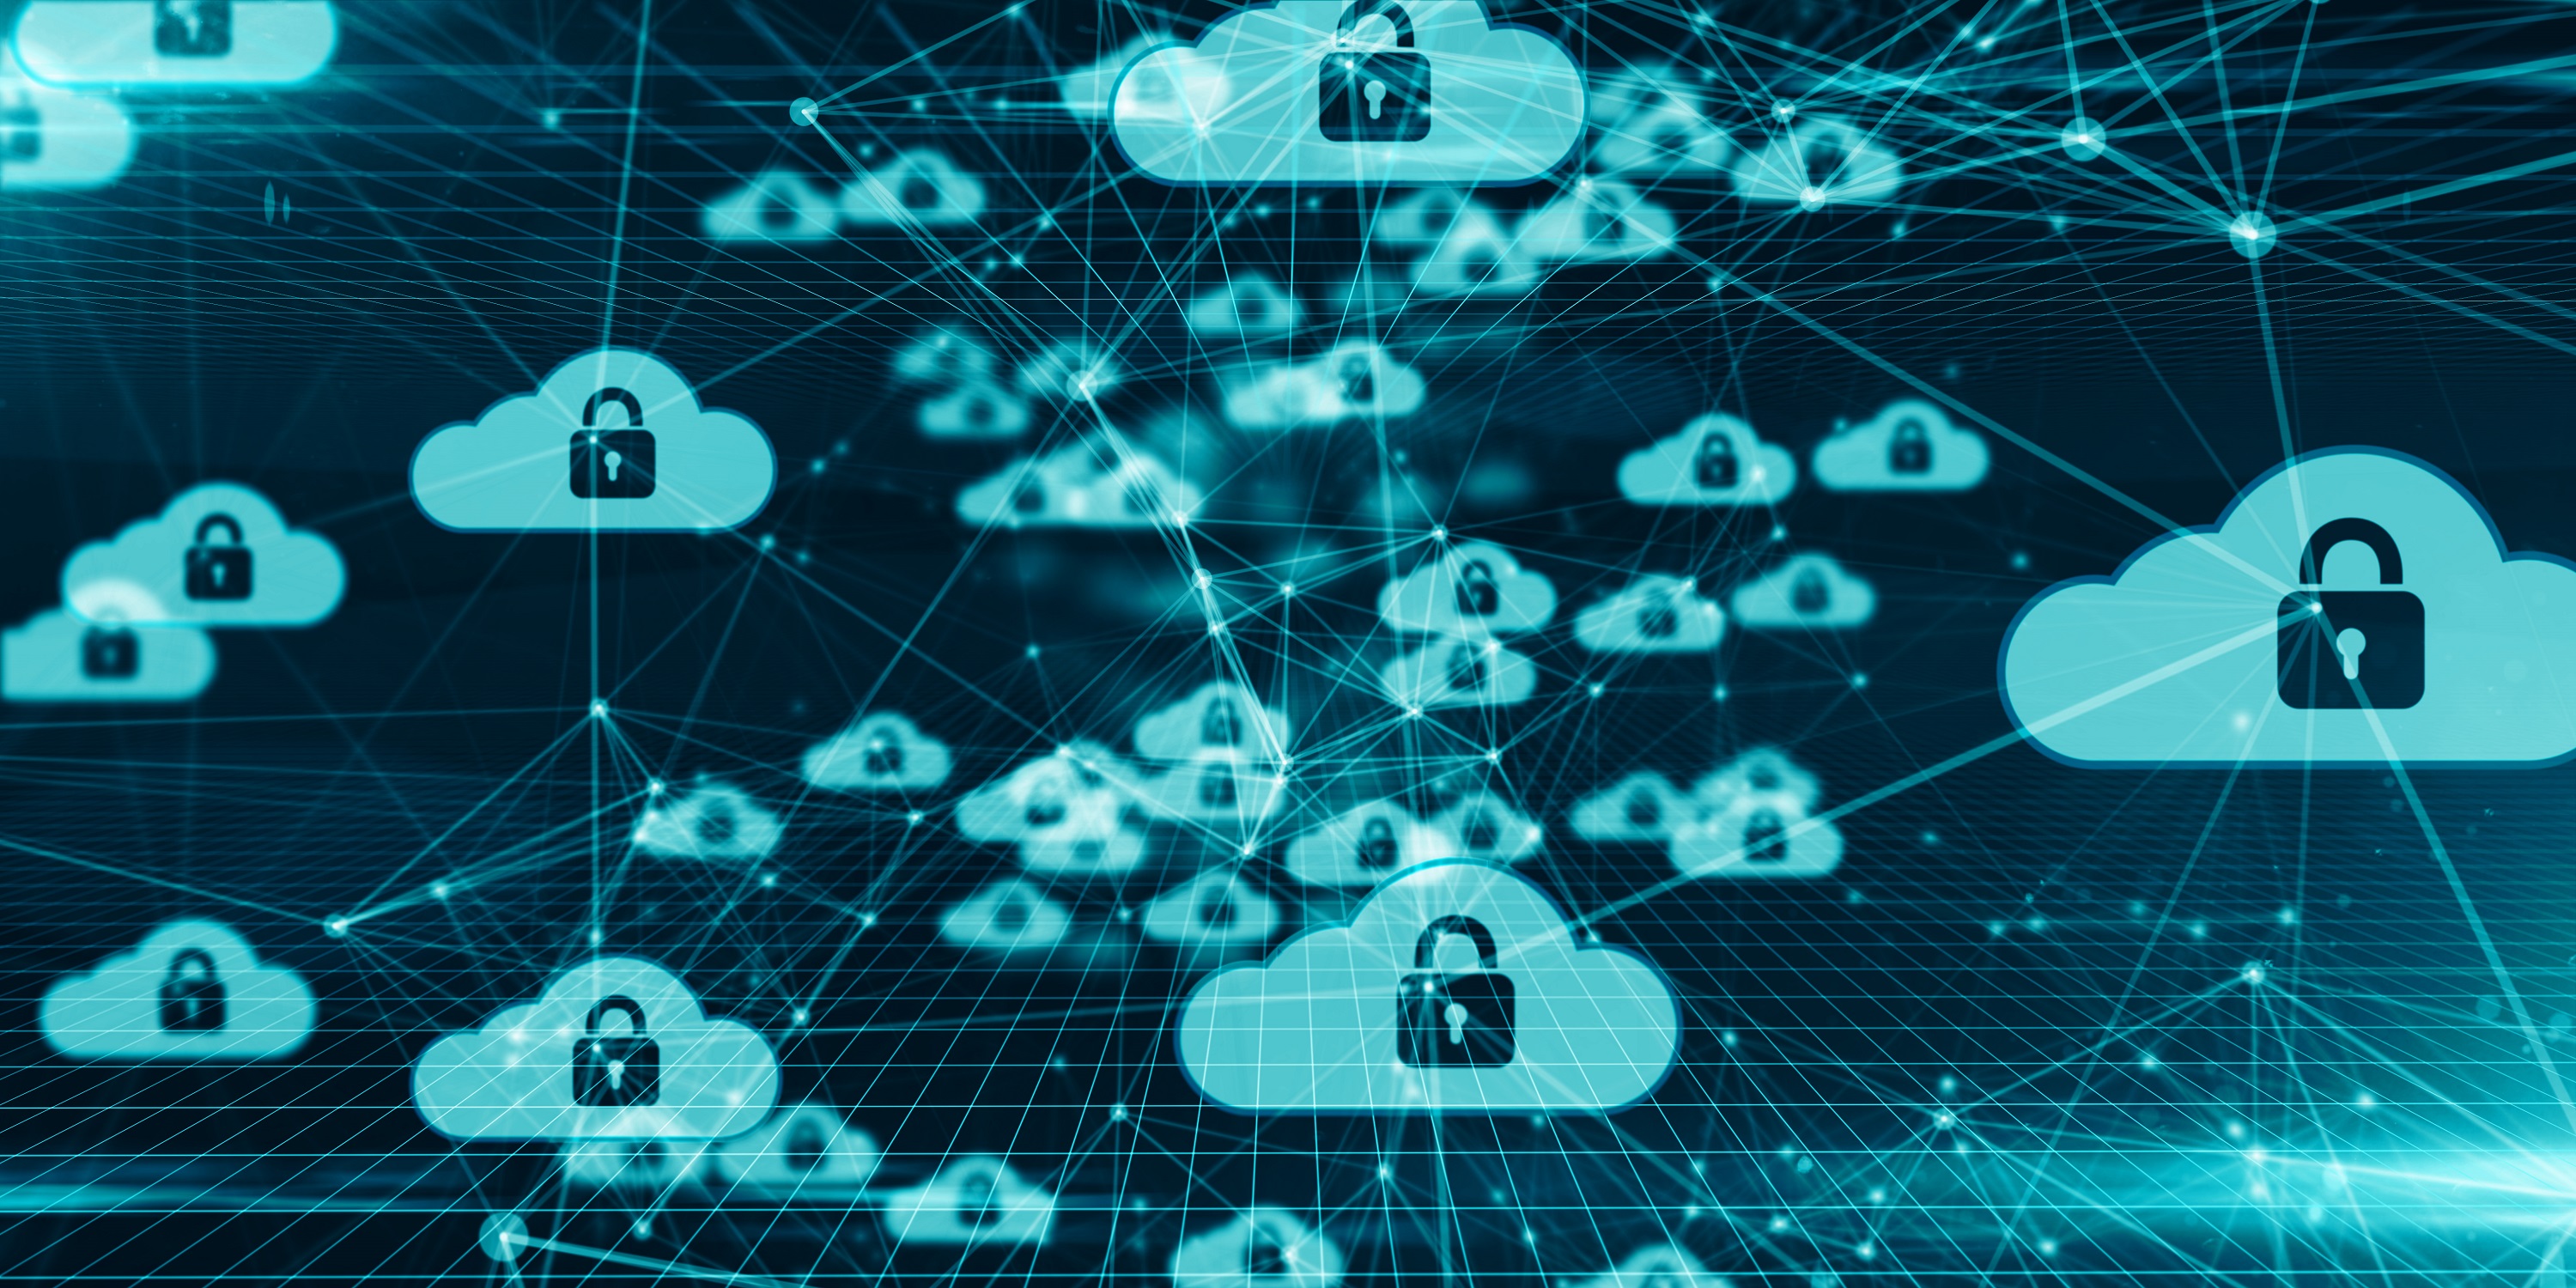 Multi-Cloud Design: The Priority Focus Should be on Application Security, Part 1